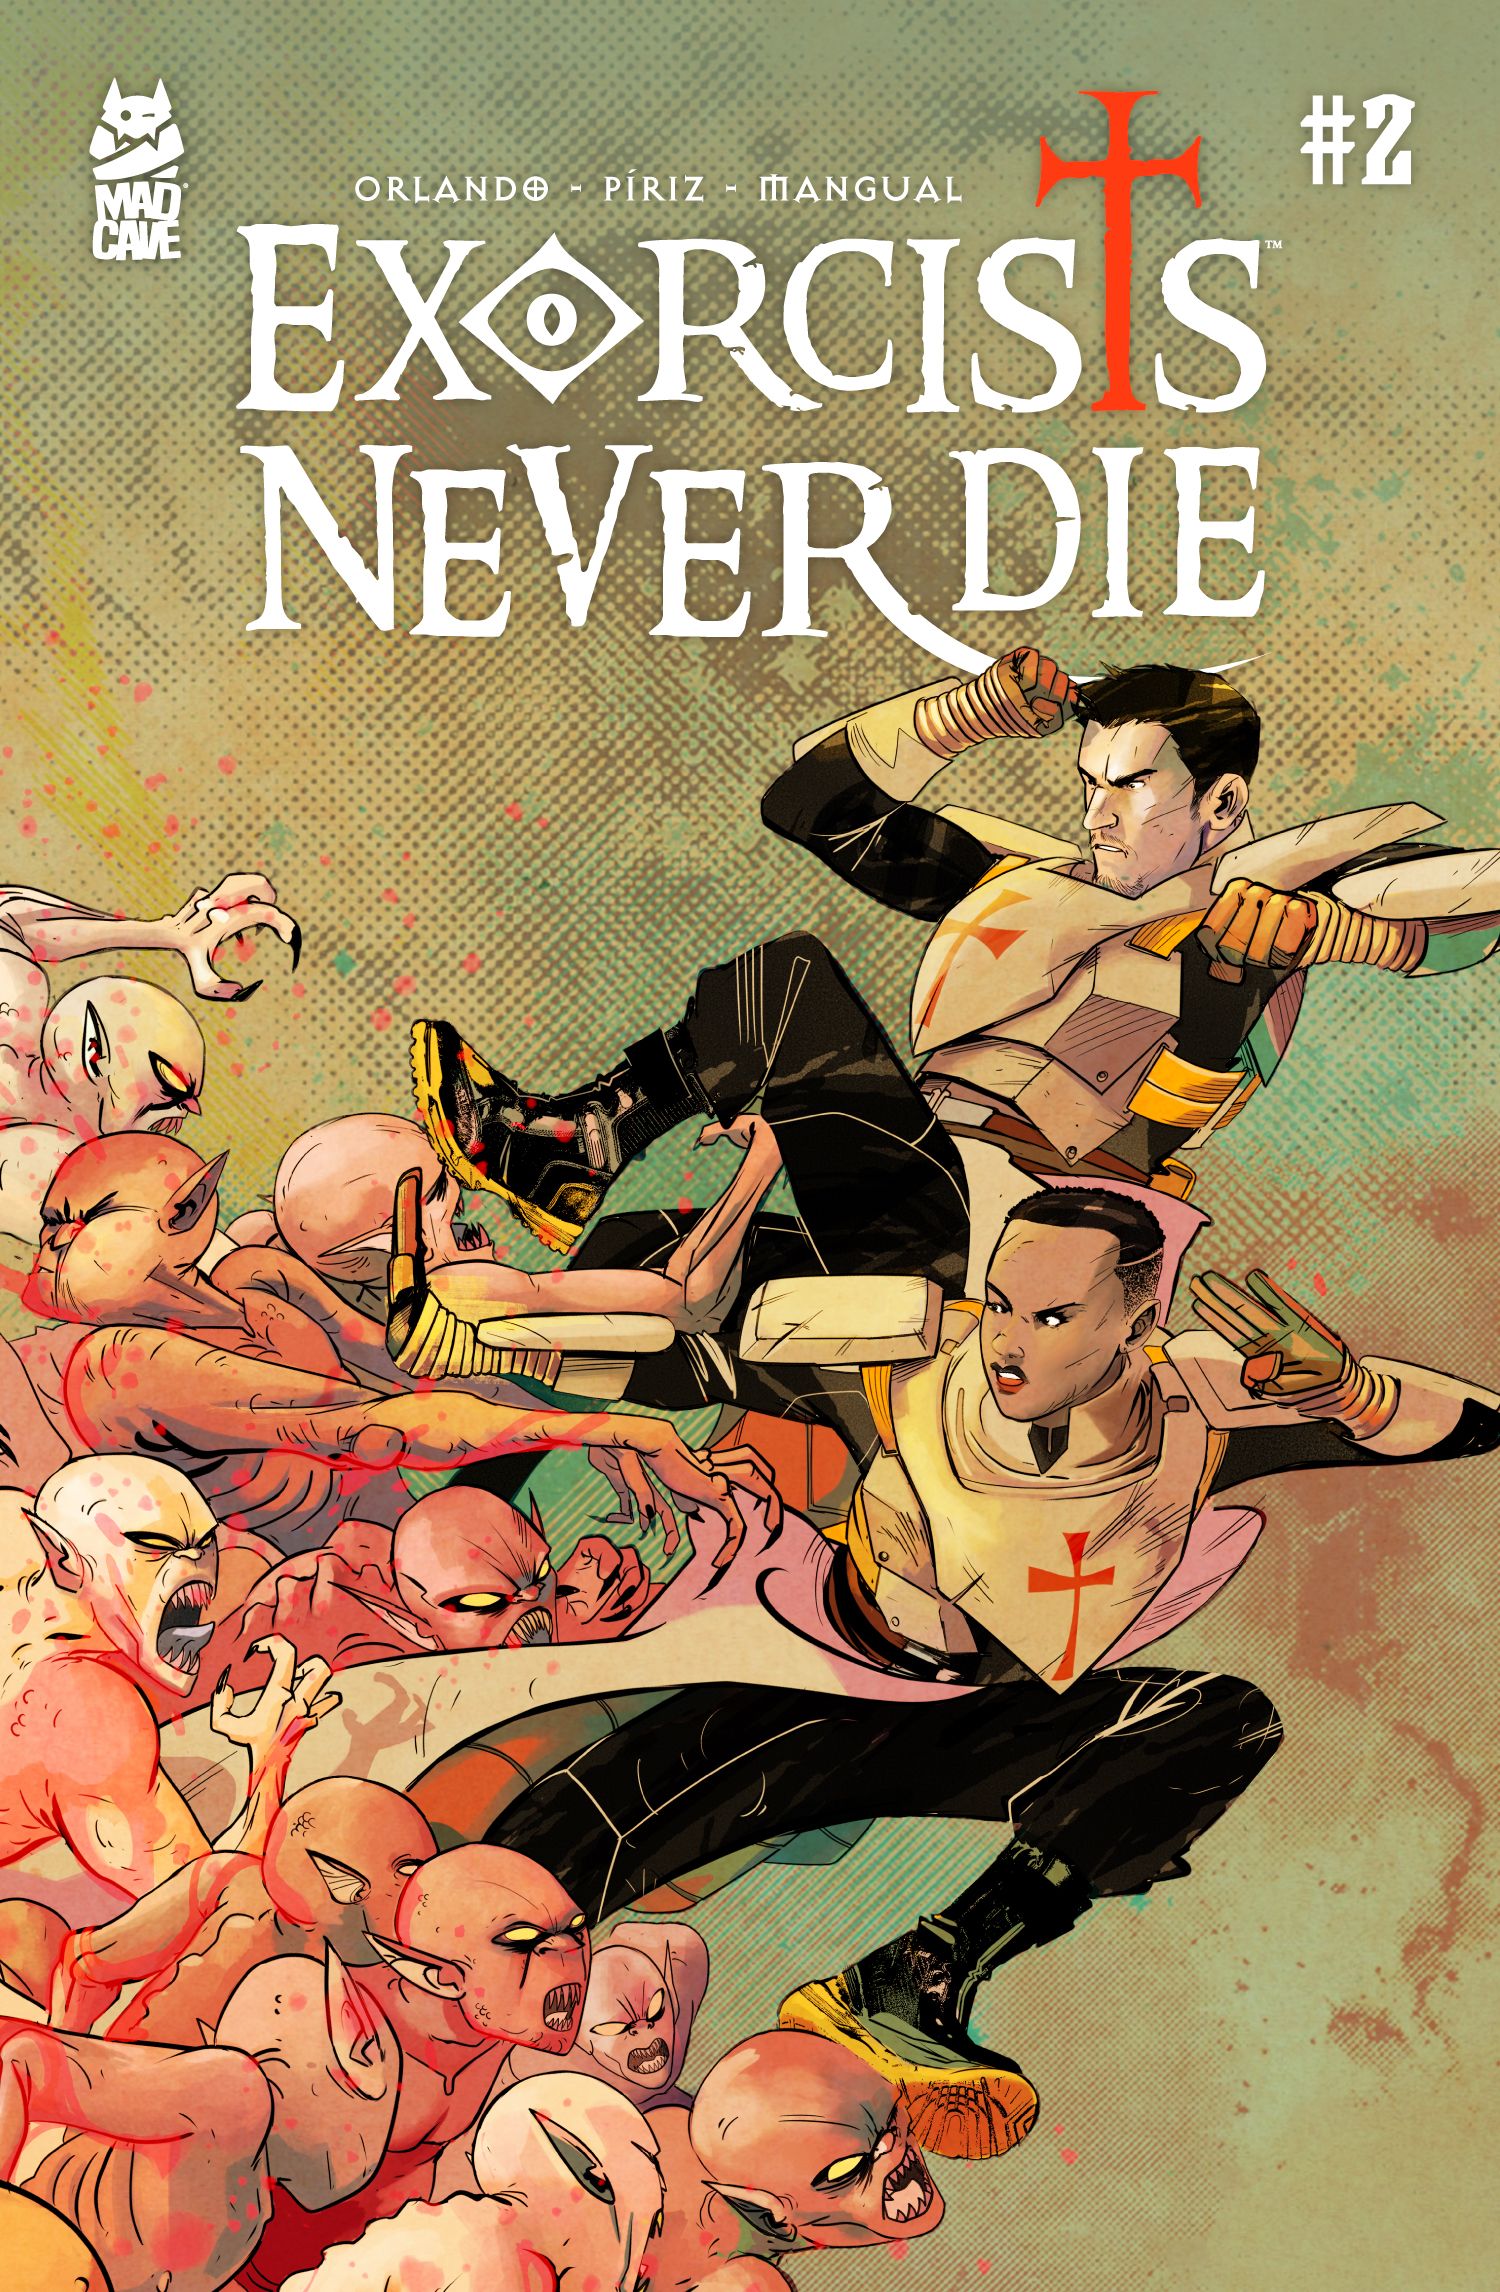 Exorcists Never Die #2 Comic